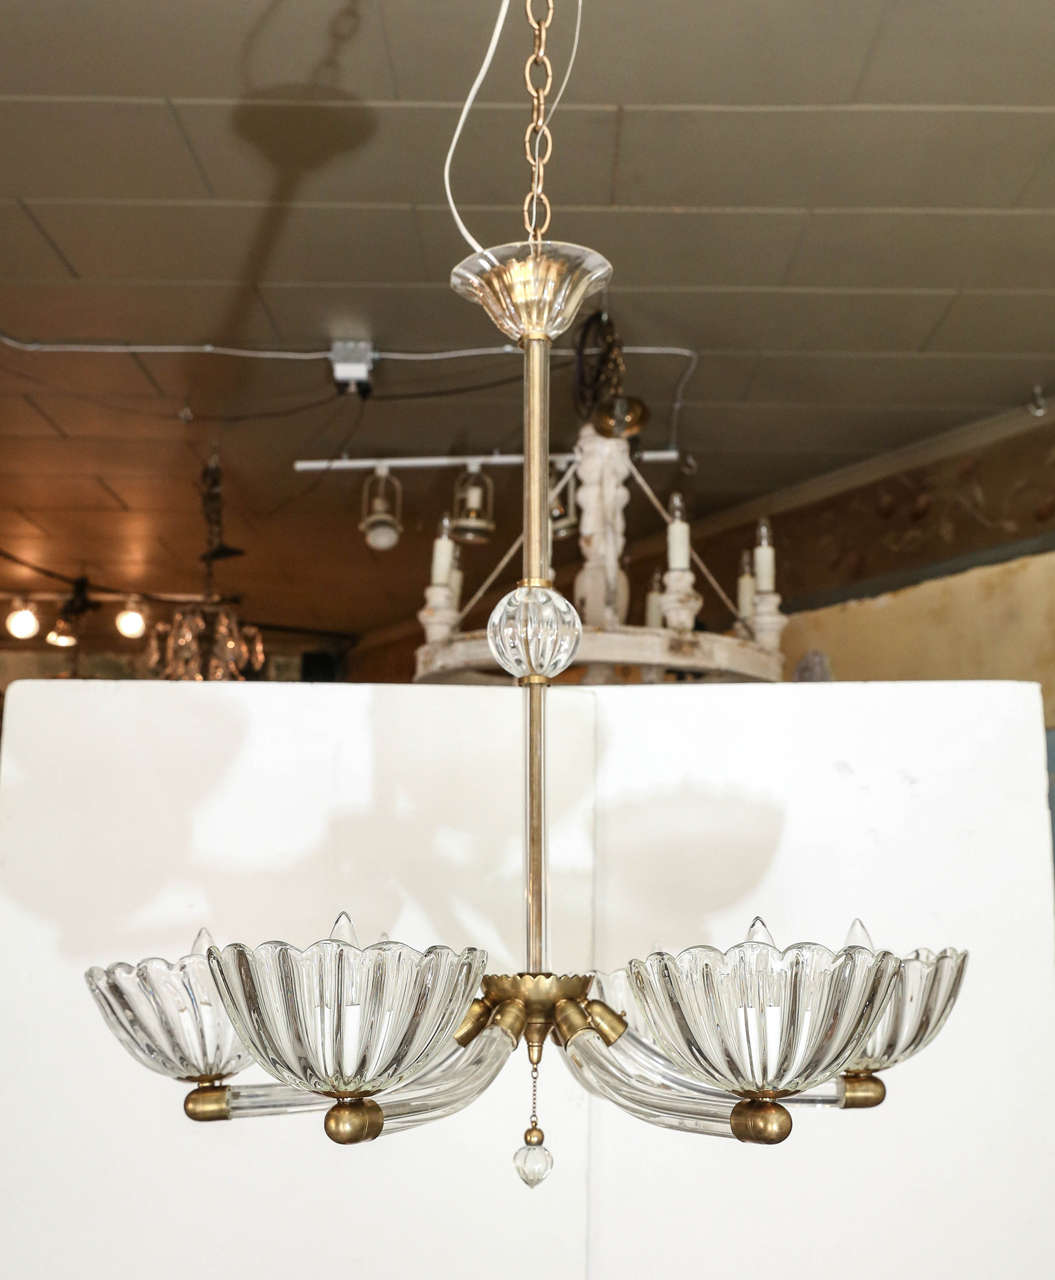 Handblown glass and bronze chandelier. Has been wired for the USA.